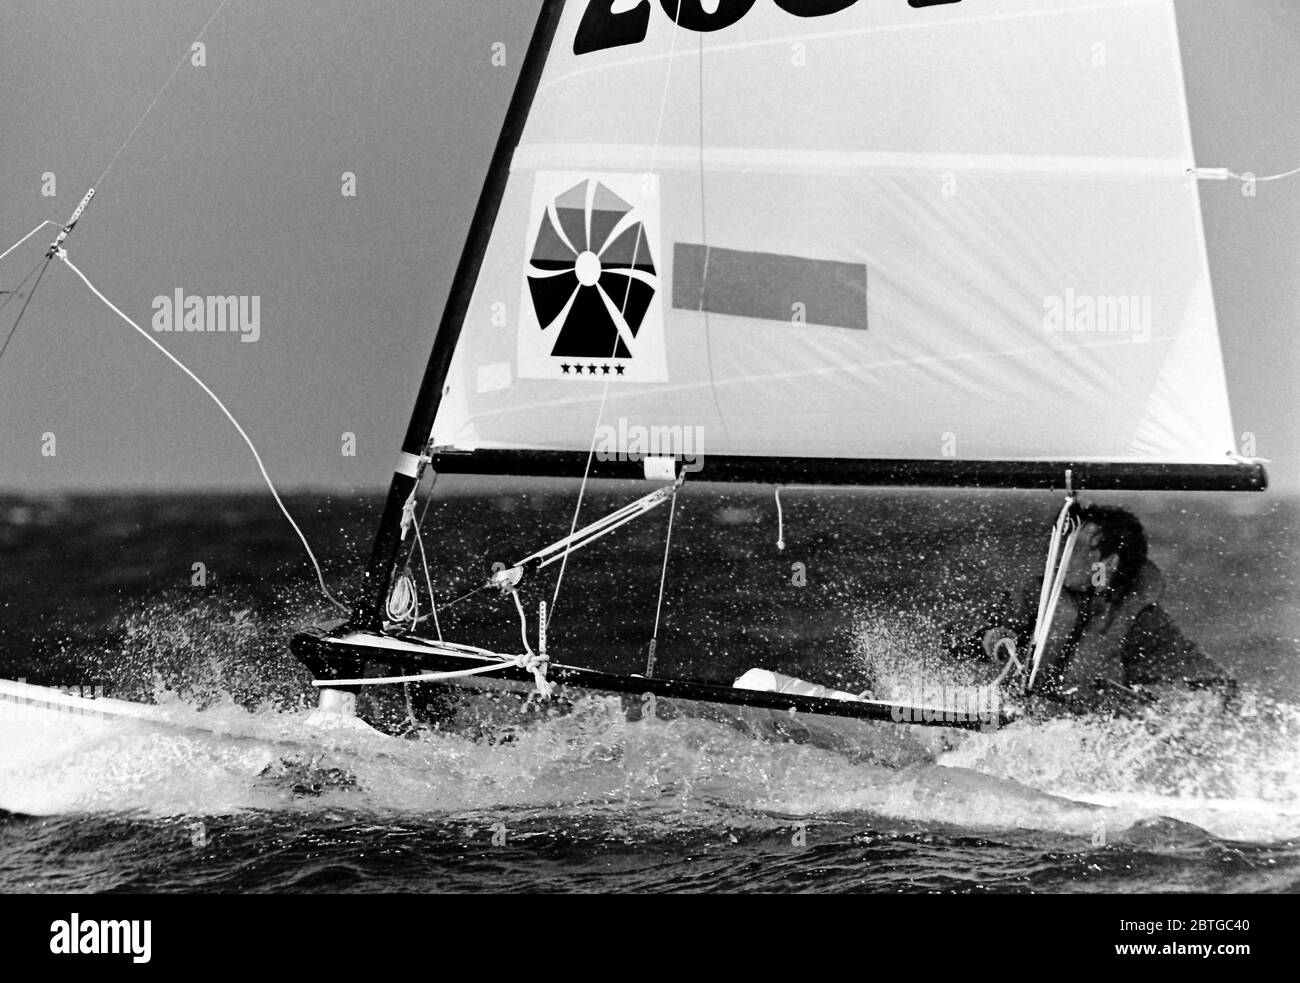 AJAXNETPHOTO. 1977. LAS SALINAS BAY, LANZAROTE, SPAIN. - A COMPETITOR RACING IN A STIFF BREEZE AND CHOPPY WATERS IN THE HOBIE CAT 14 WORLD CHAMPIONSHIPS. PHOTO:JONATHAN EASTLAND/AJAX REF:7726091 90 Stock Photo